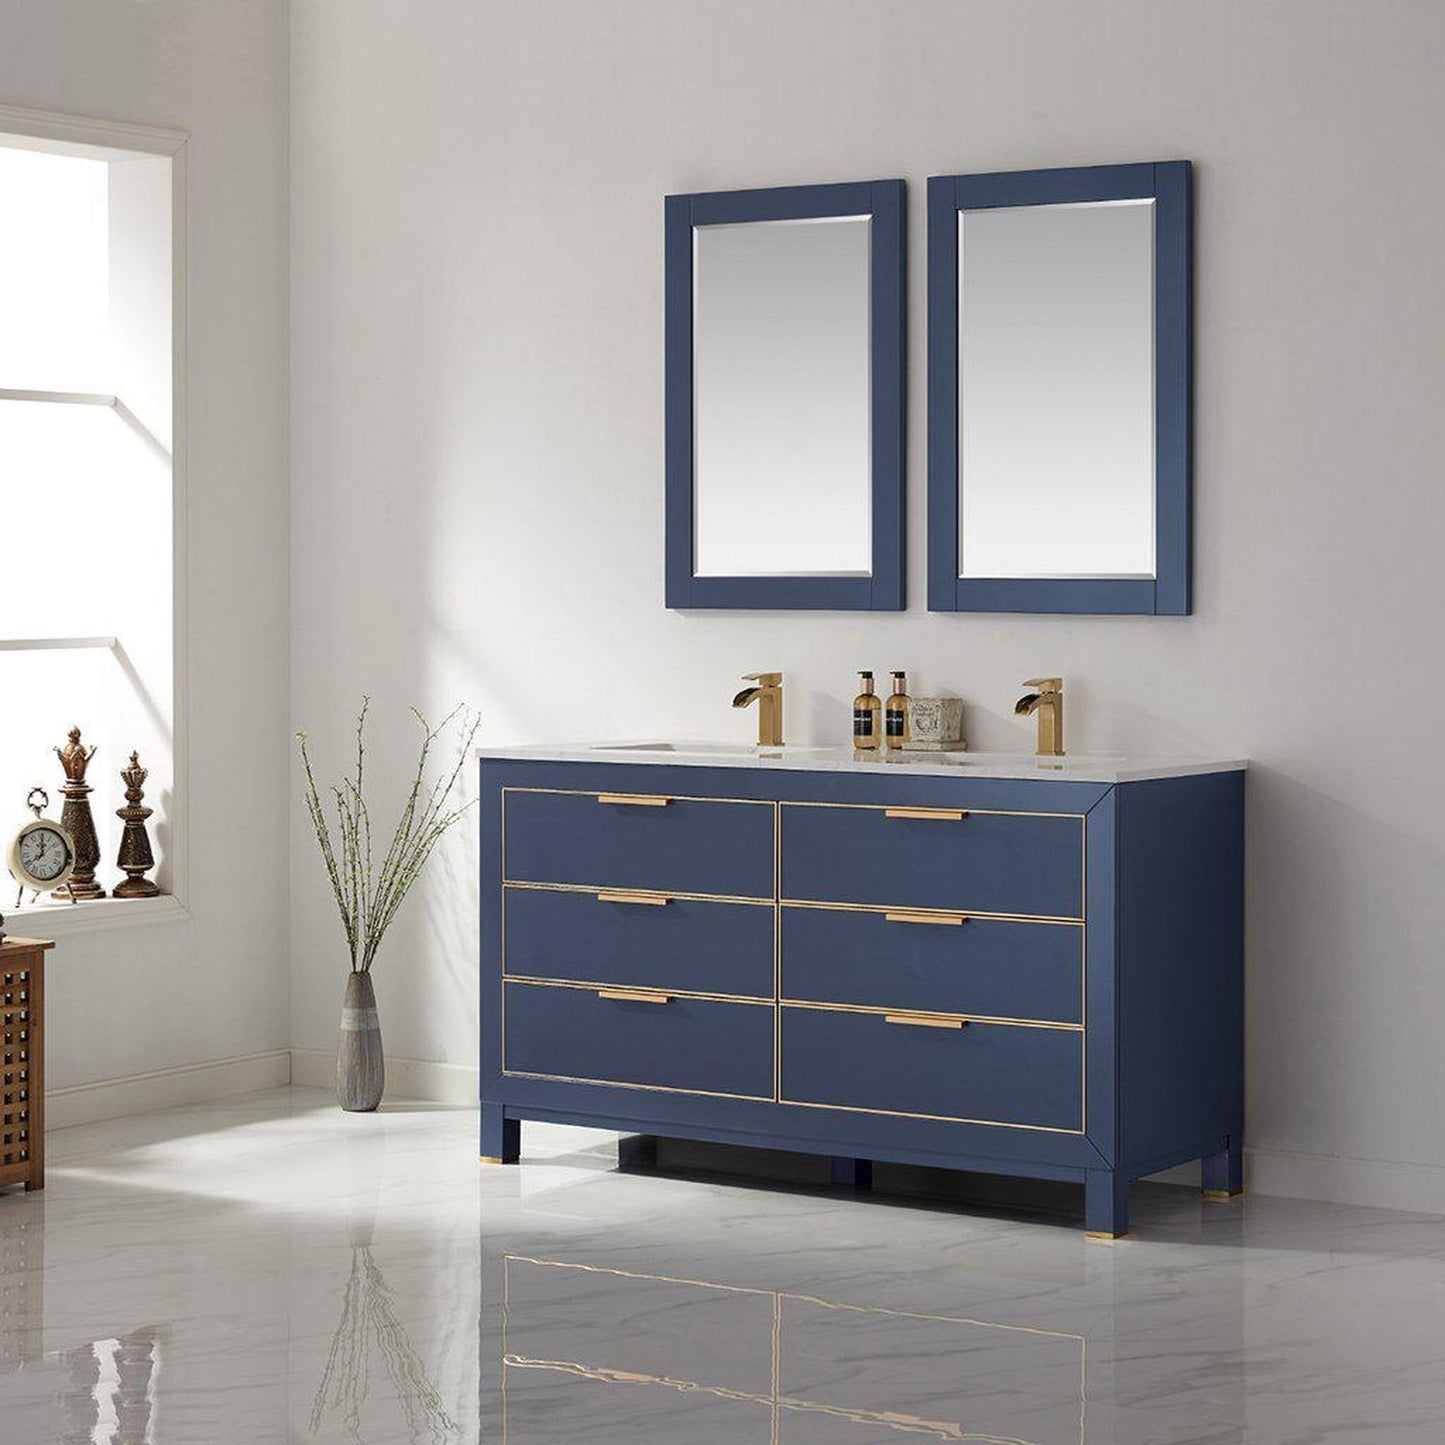 Altair Jackson 60" Double Royal Blue Freestanding Bathroom Vanity Set With Mirror, Aosta White Composite Stone Top, Two Rectangular Undermount Ceramic Sinks, and Overflow